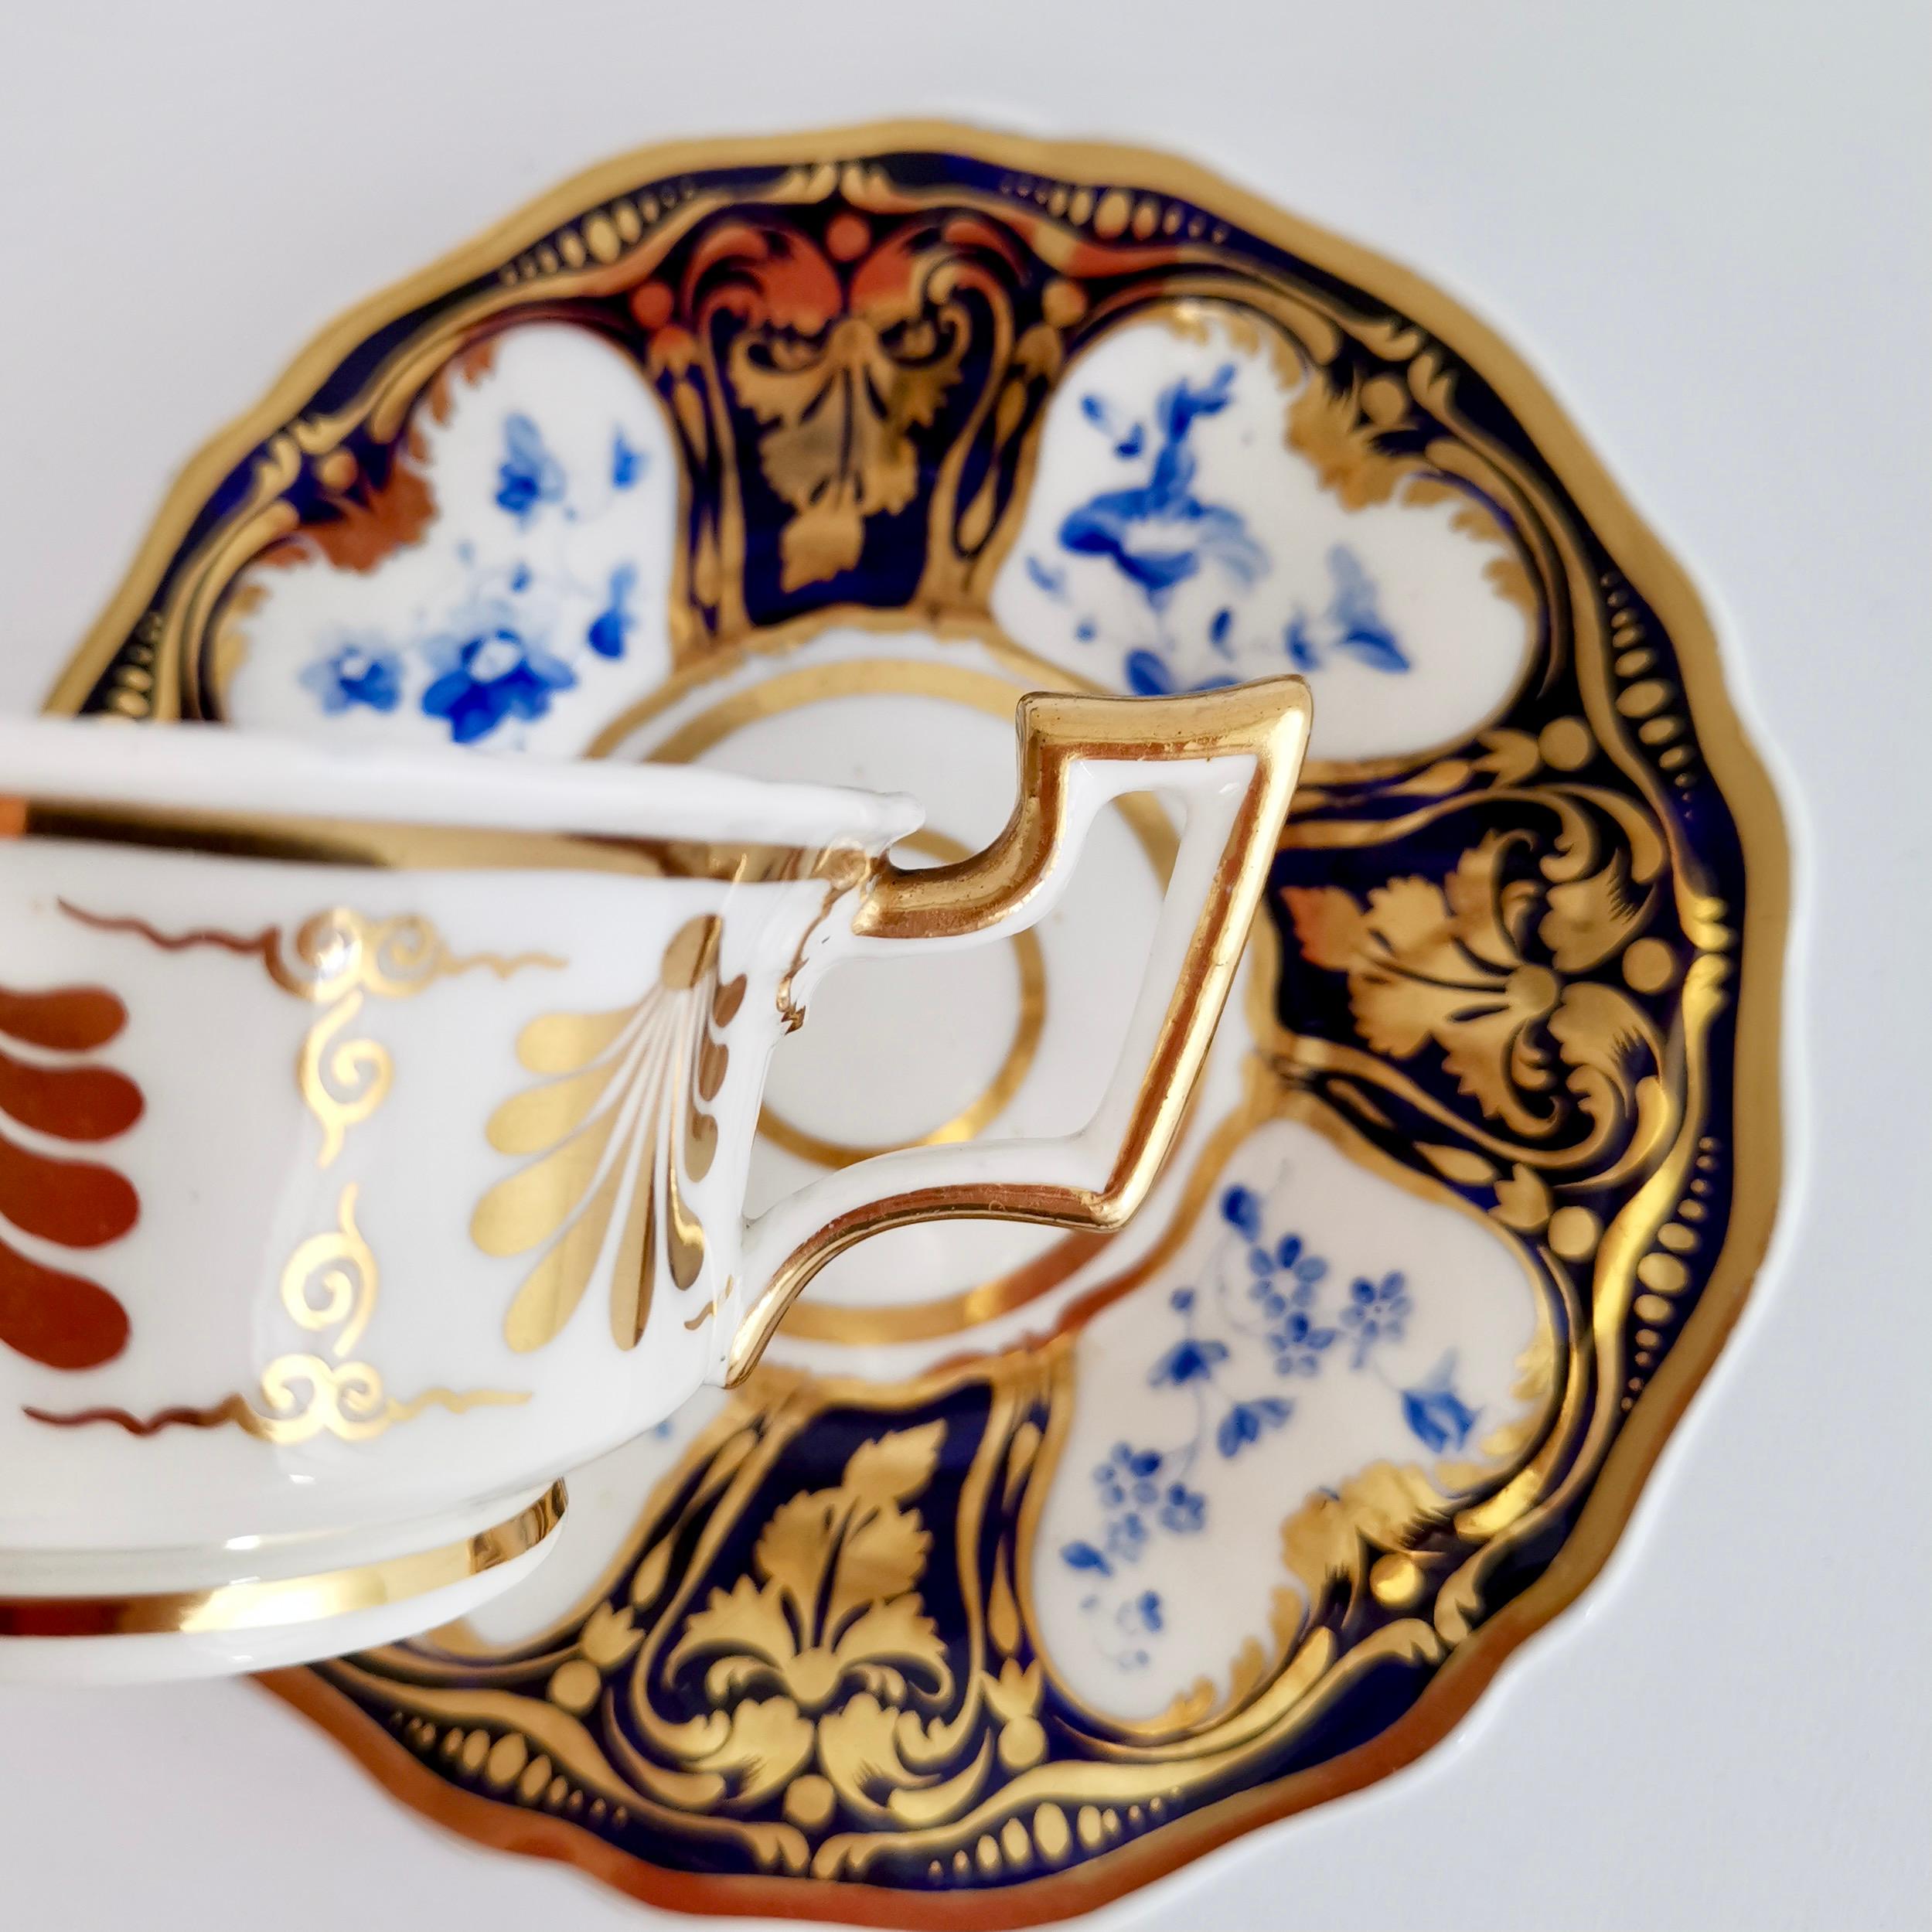 Ridgway Porcelain Teacup and Saucer, Blue Flowers and Gilt, Regency, Ca 1825 For Sale 4